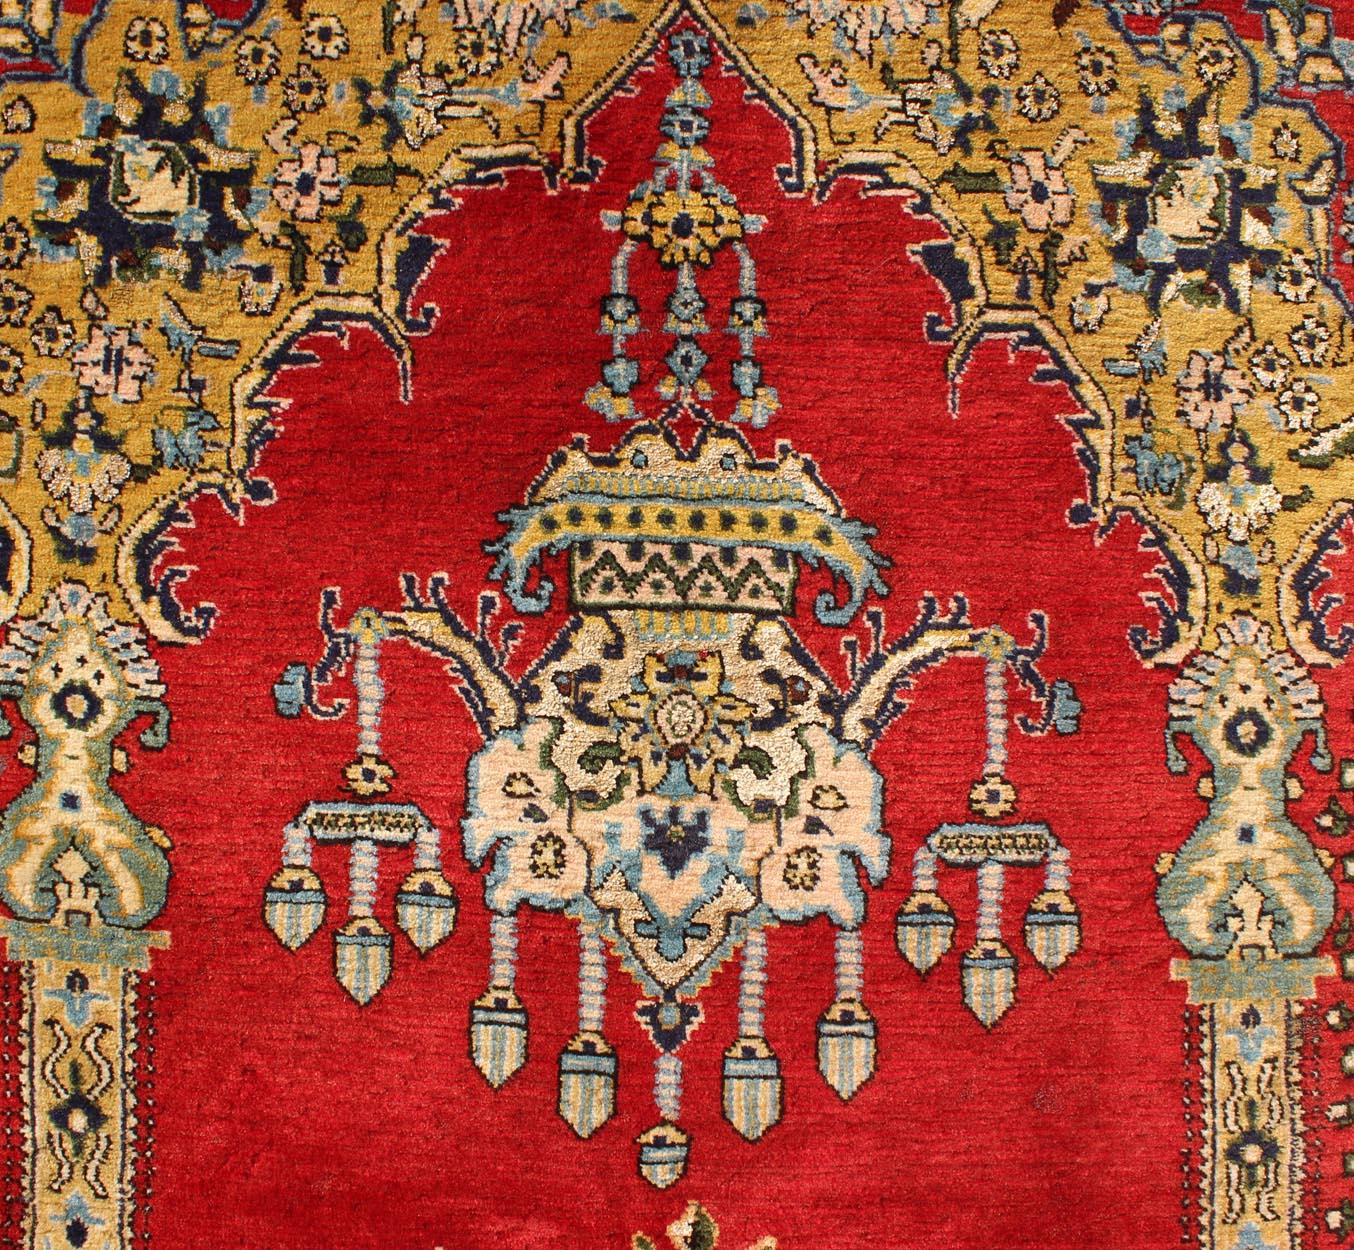 Hand-Knotted Vintage Persian Qum Prayer Rug in Bright Red with Floral Bouquet Chandelier